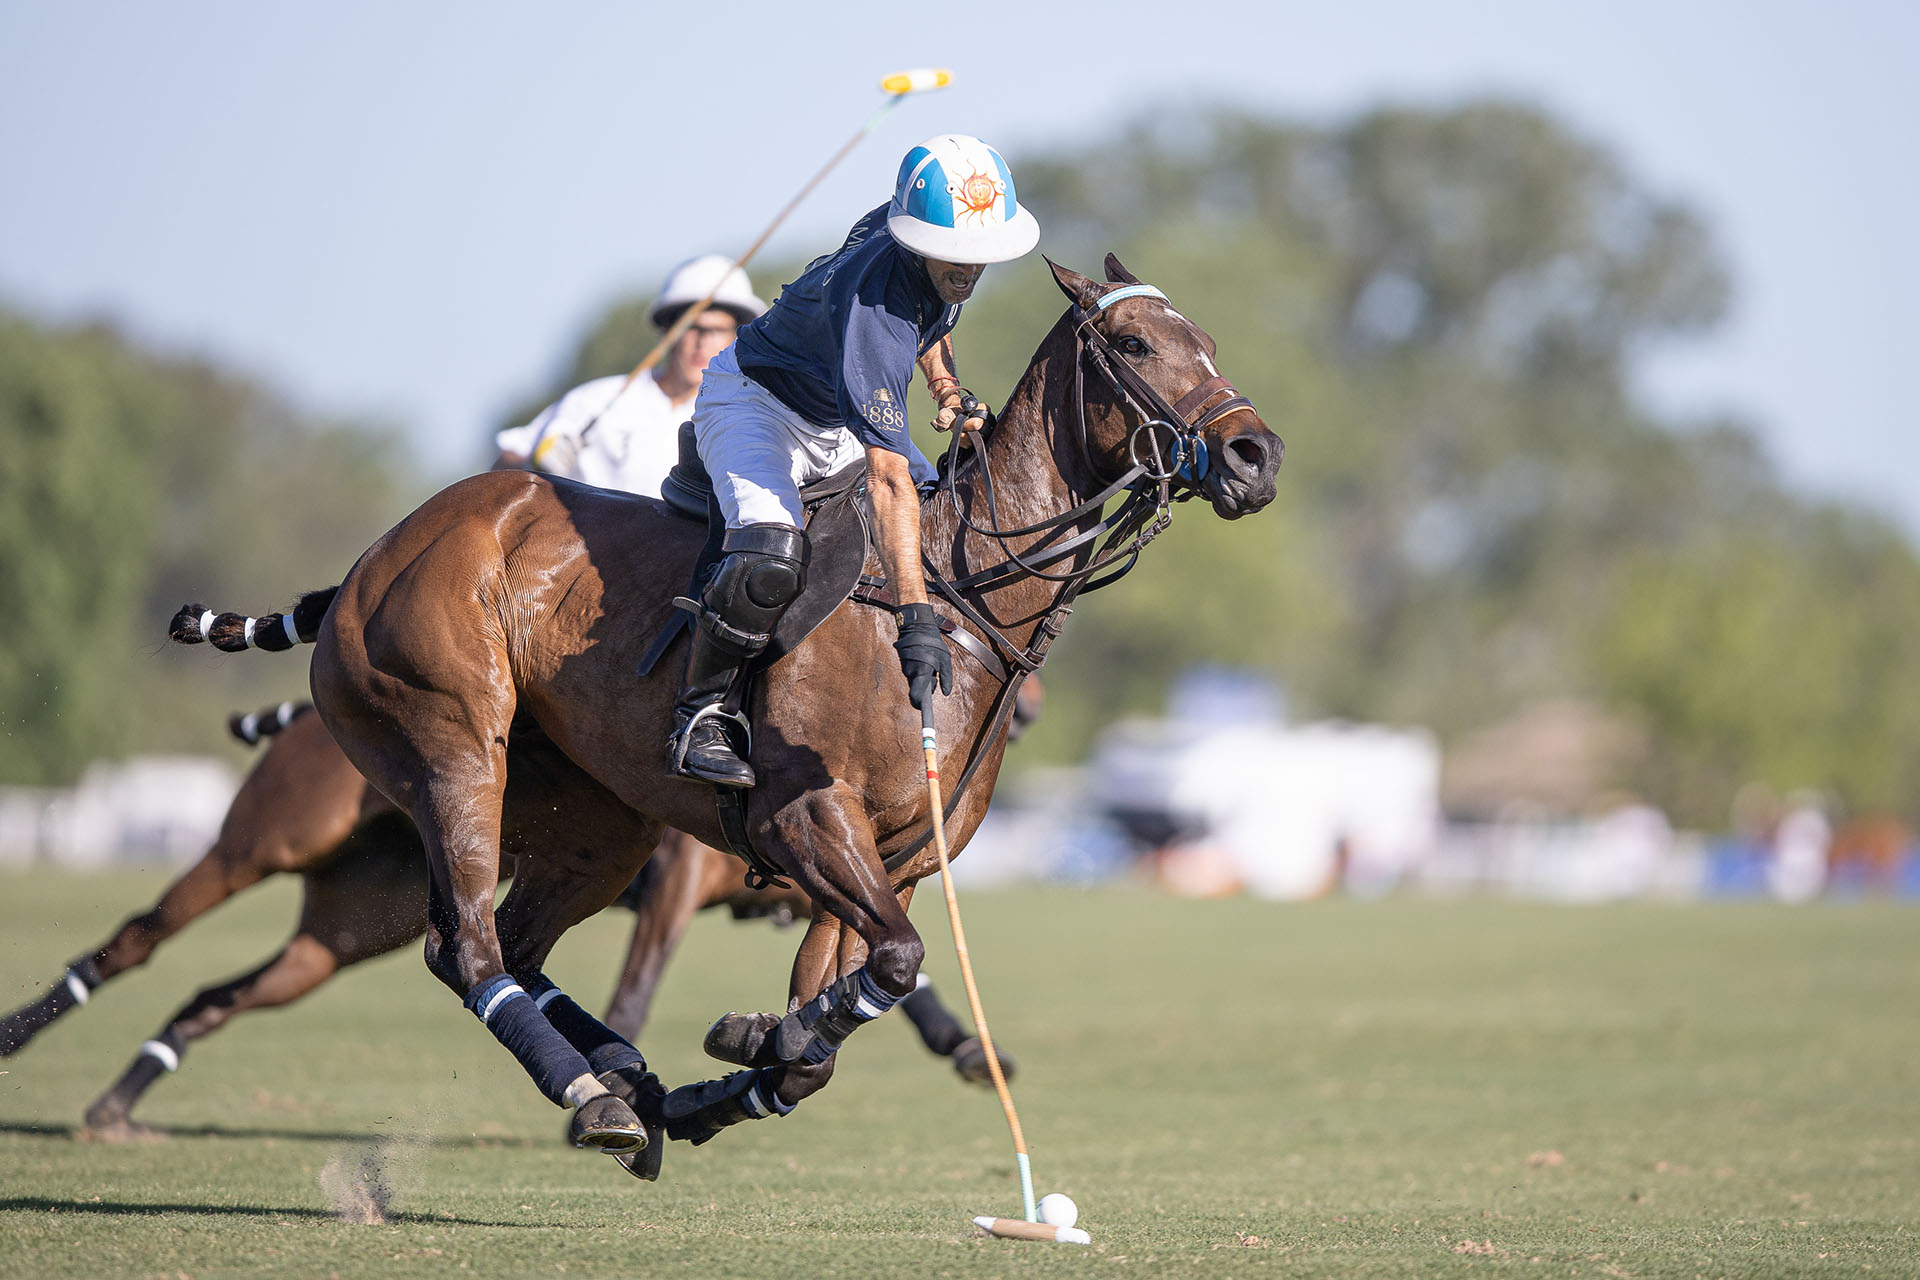 All About Polo, Handicaps